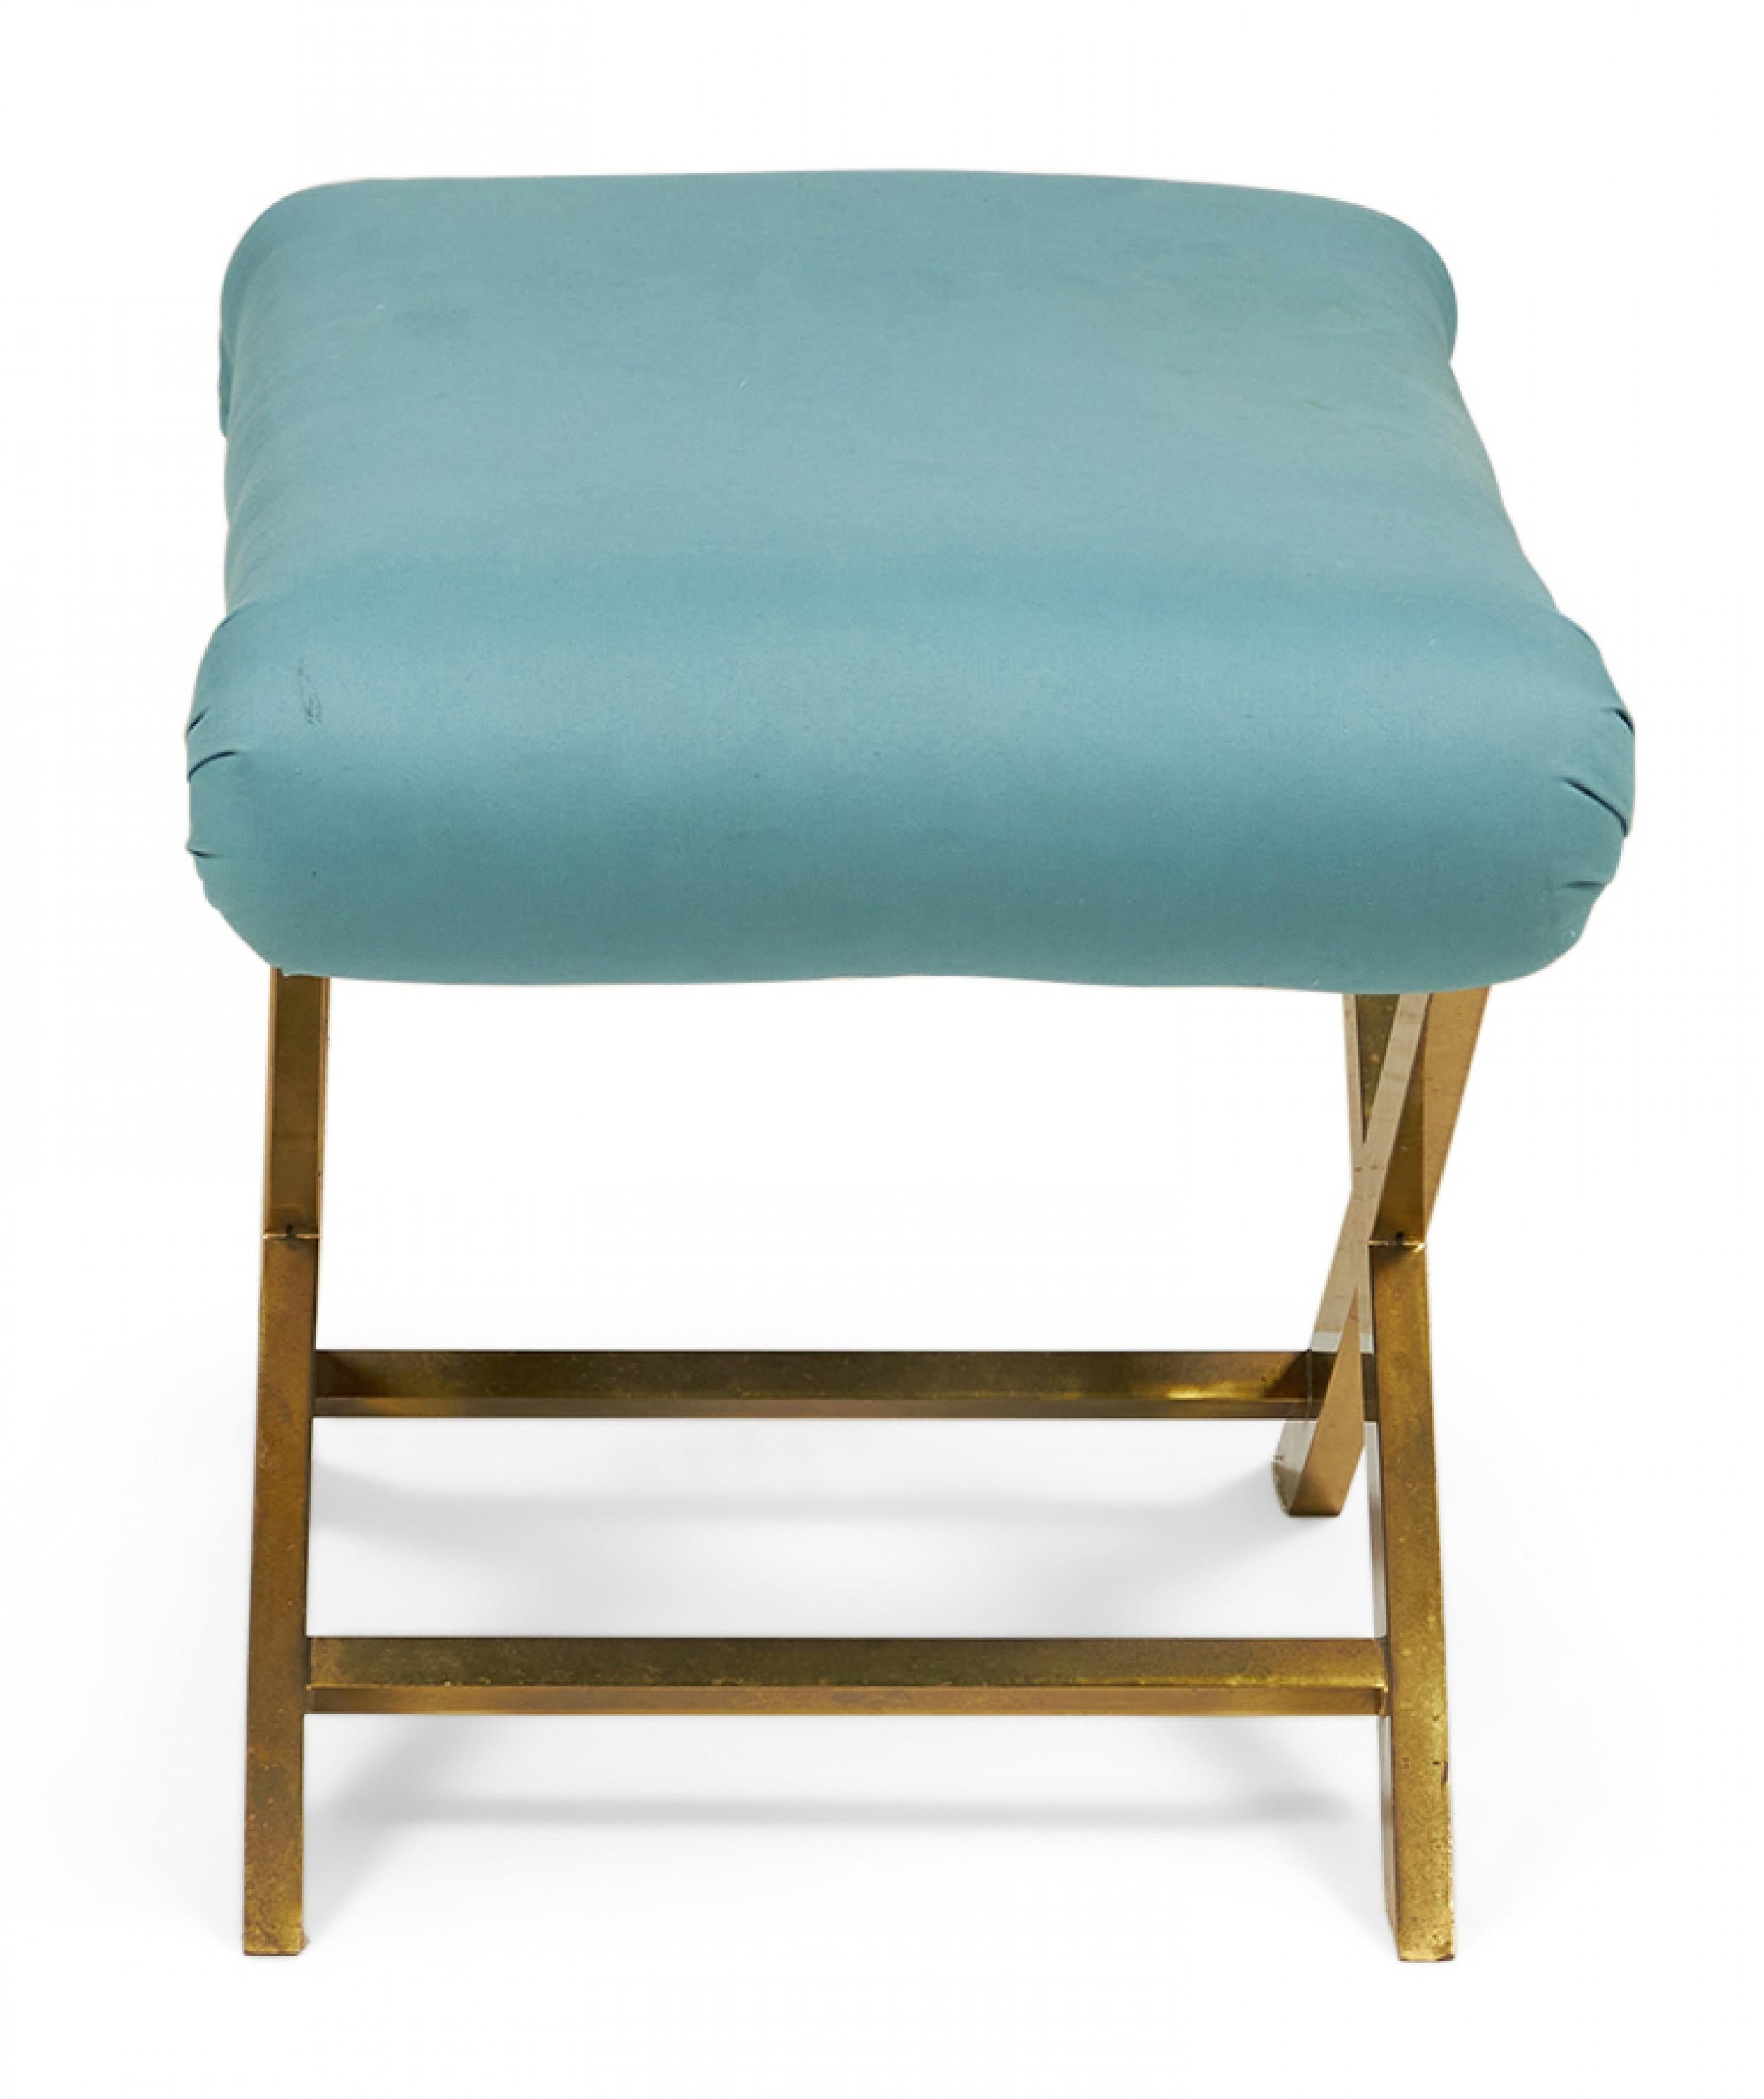 Mid-Century Brass and Teal Cotton Upholstered X-Bench For Sale 1